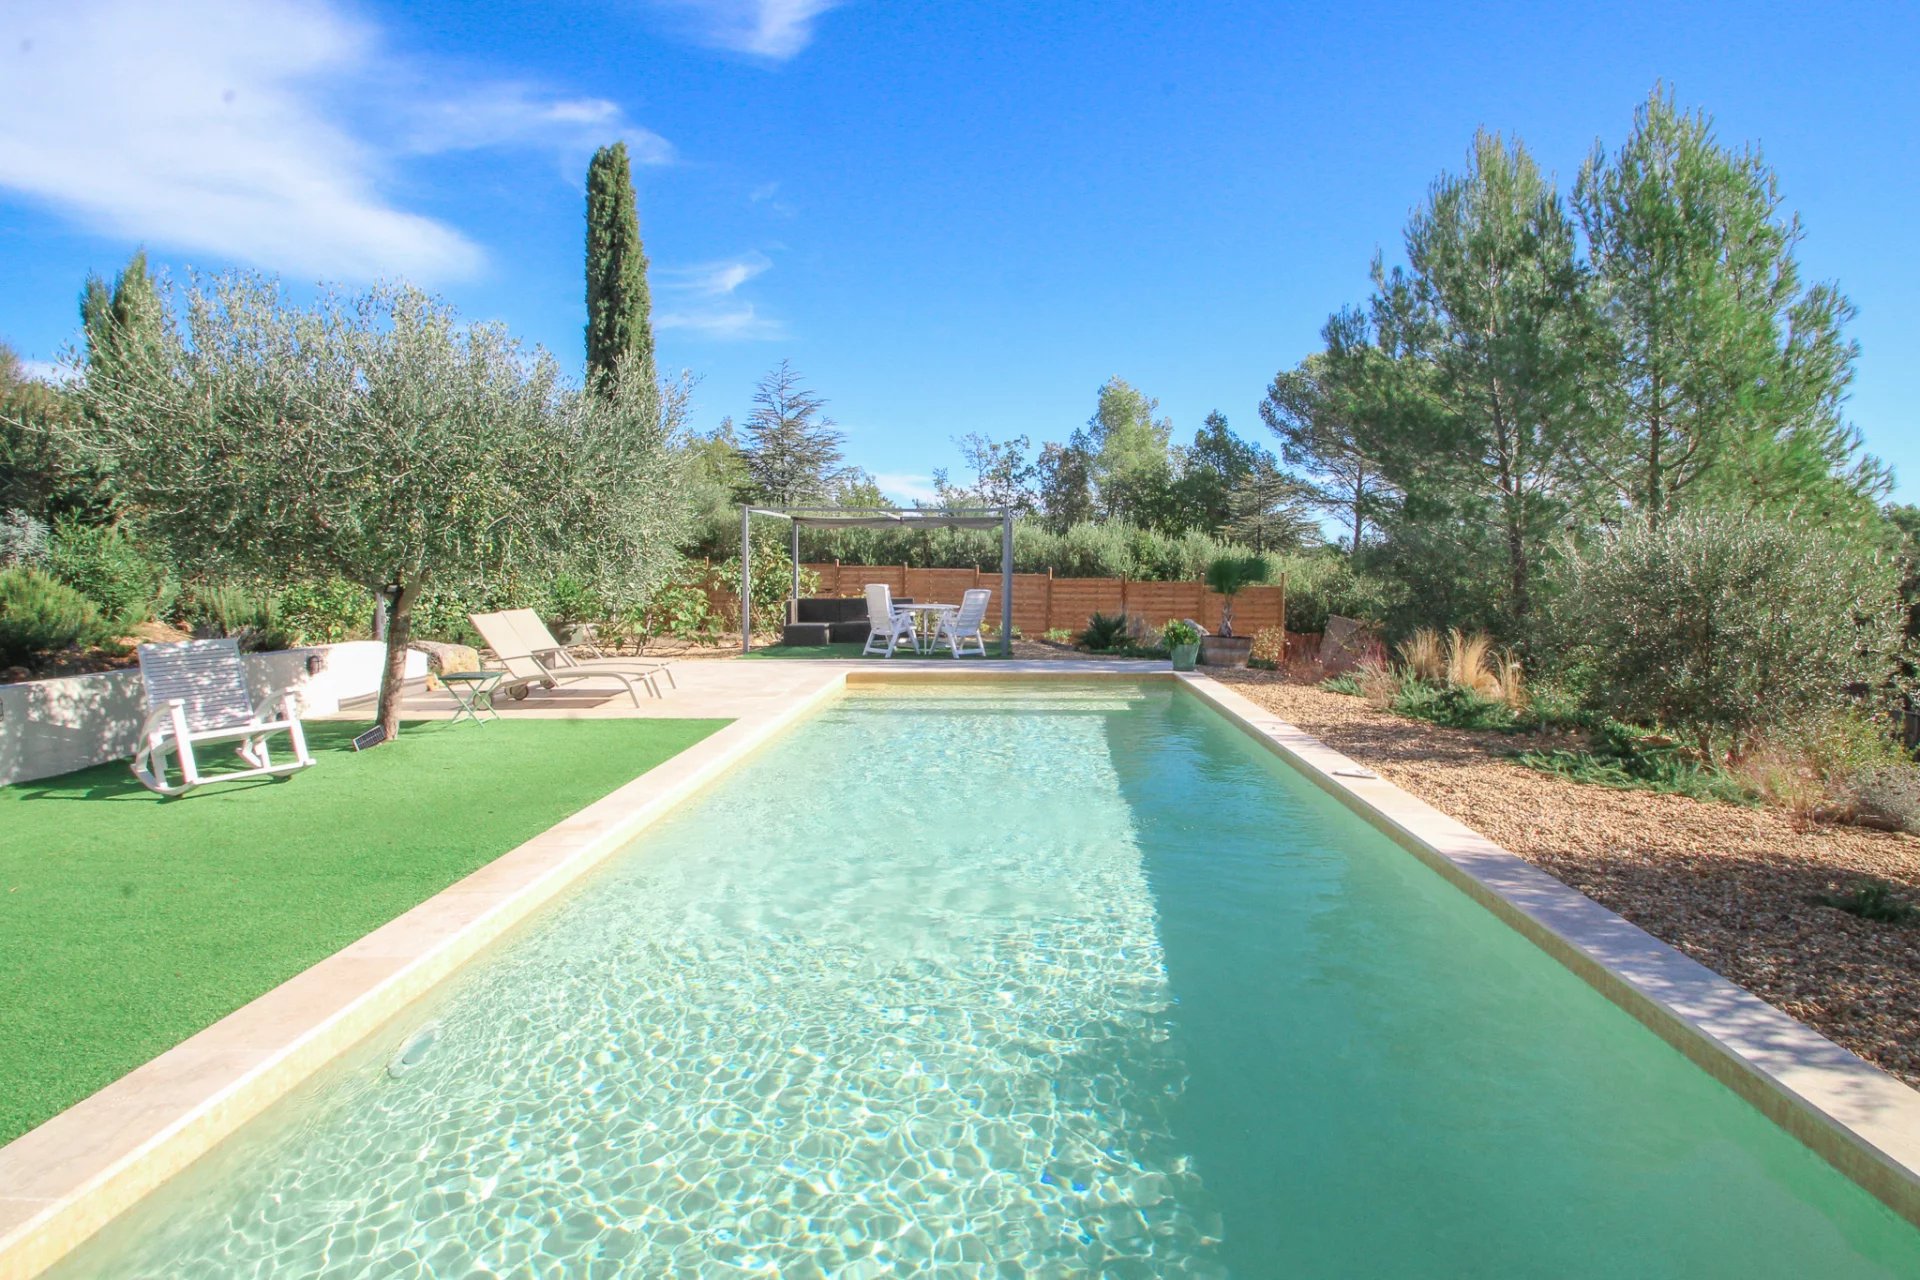 Villa with pool  in a beautiful, secure residential estate located in the heart of nature